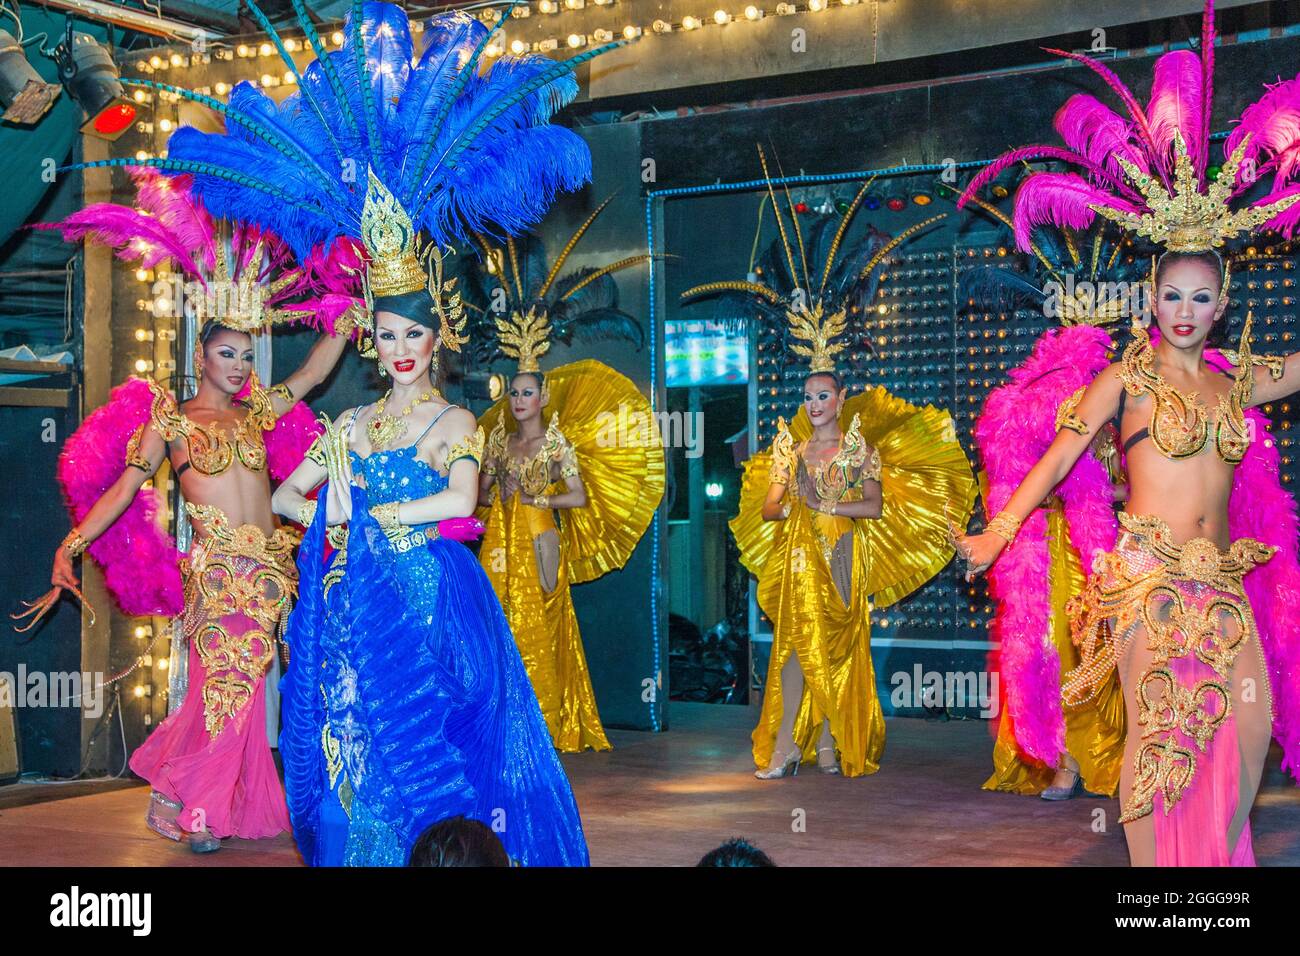 Thai ladyboys dressed in sparkly colourful costumes with flamboyant headdresses performing cabaret numbers on stage, Phuket, Thailand Stock Photo